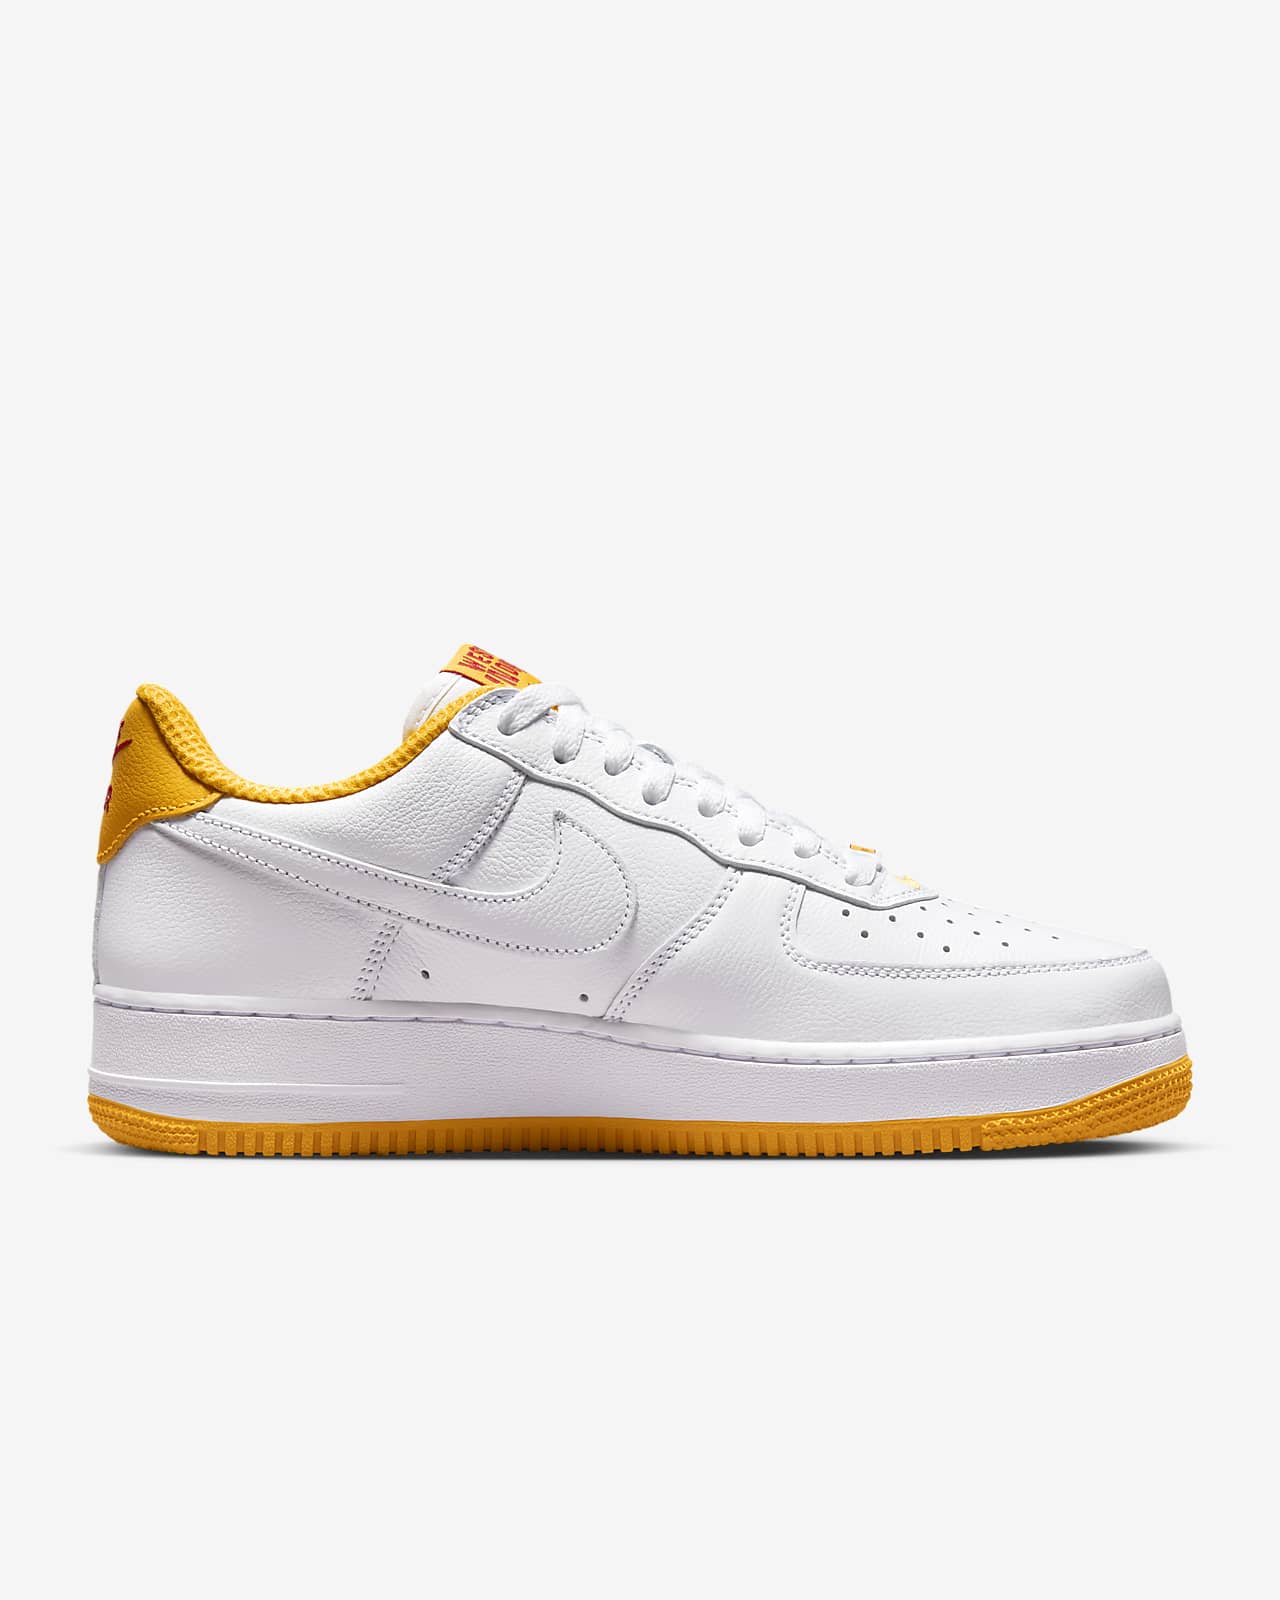 Nike Air Force 1 Low Off-White University Gold Shoes